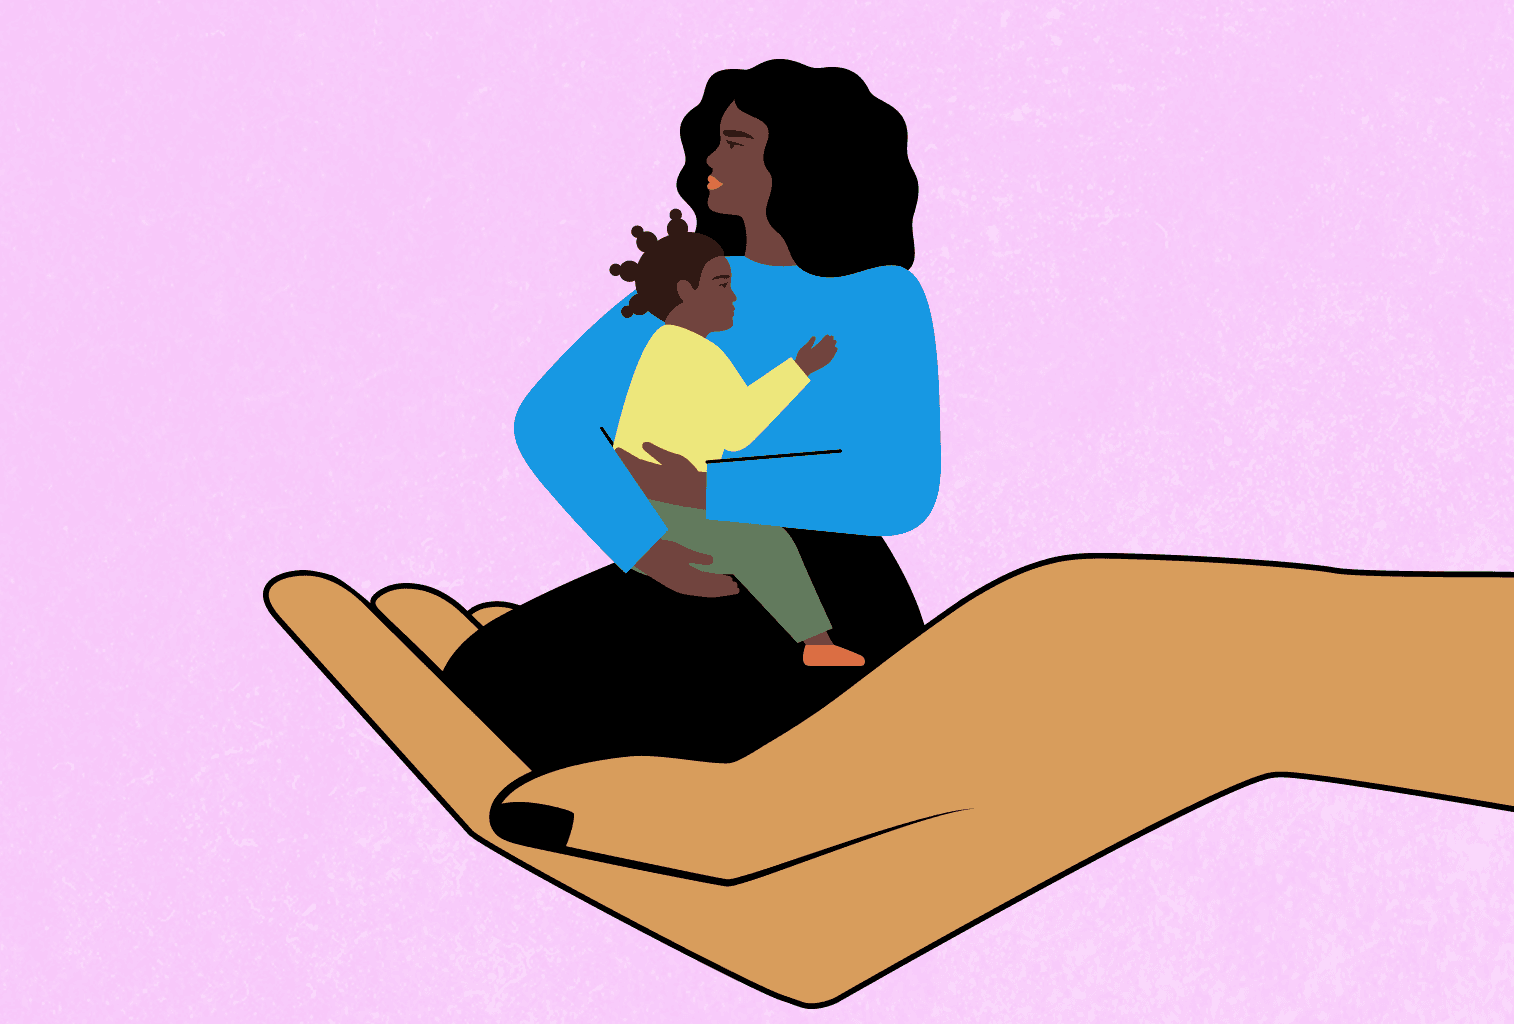 An illustration of a Black woman holding a young child, both being held by a giant hand.